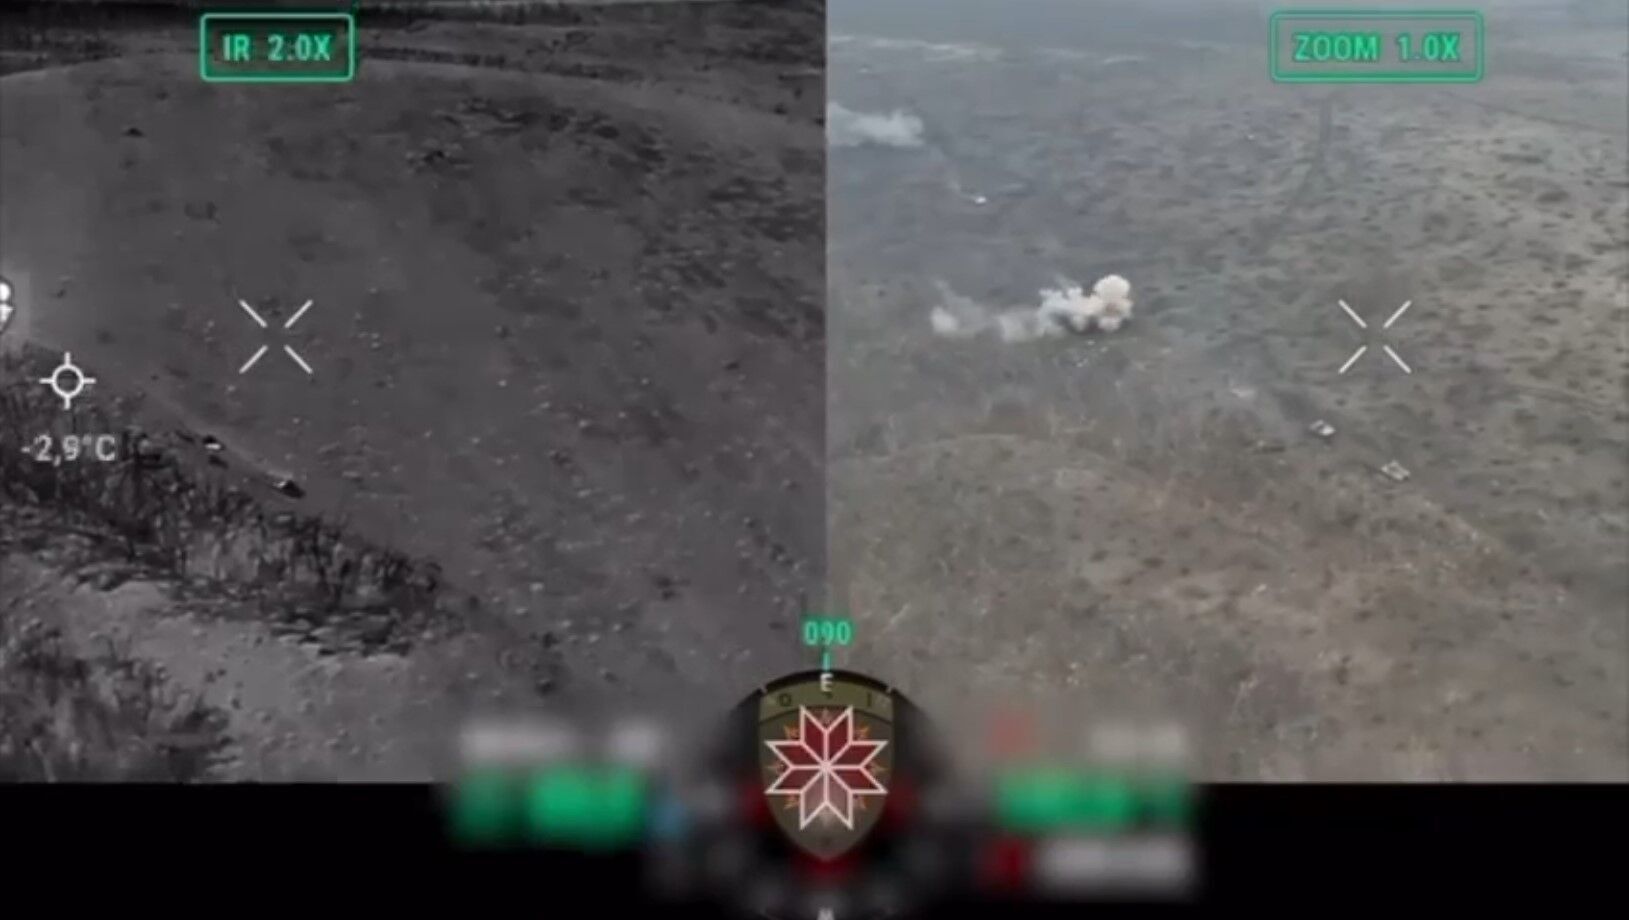 The enemy's plans thwarted: Syrskyi shows how Defense Forces destroy Russian equipment. Video 